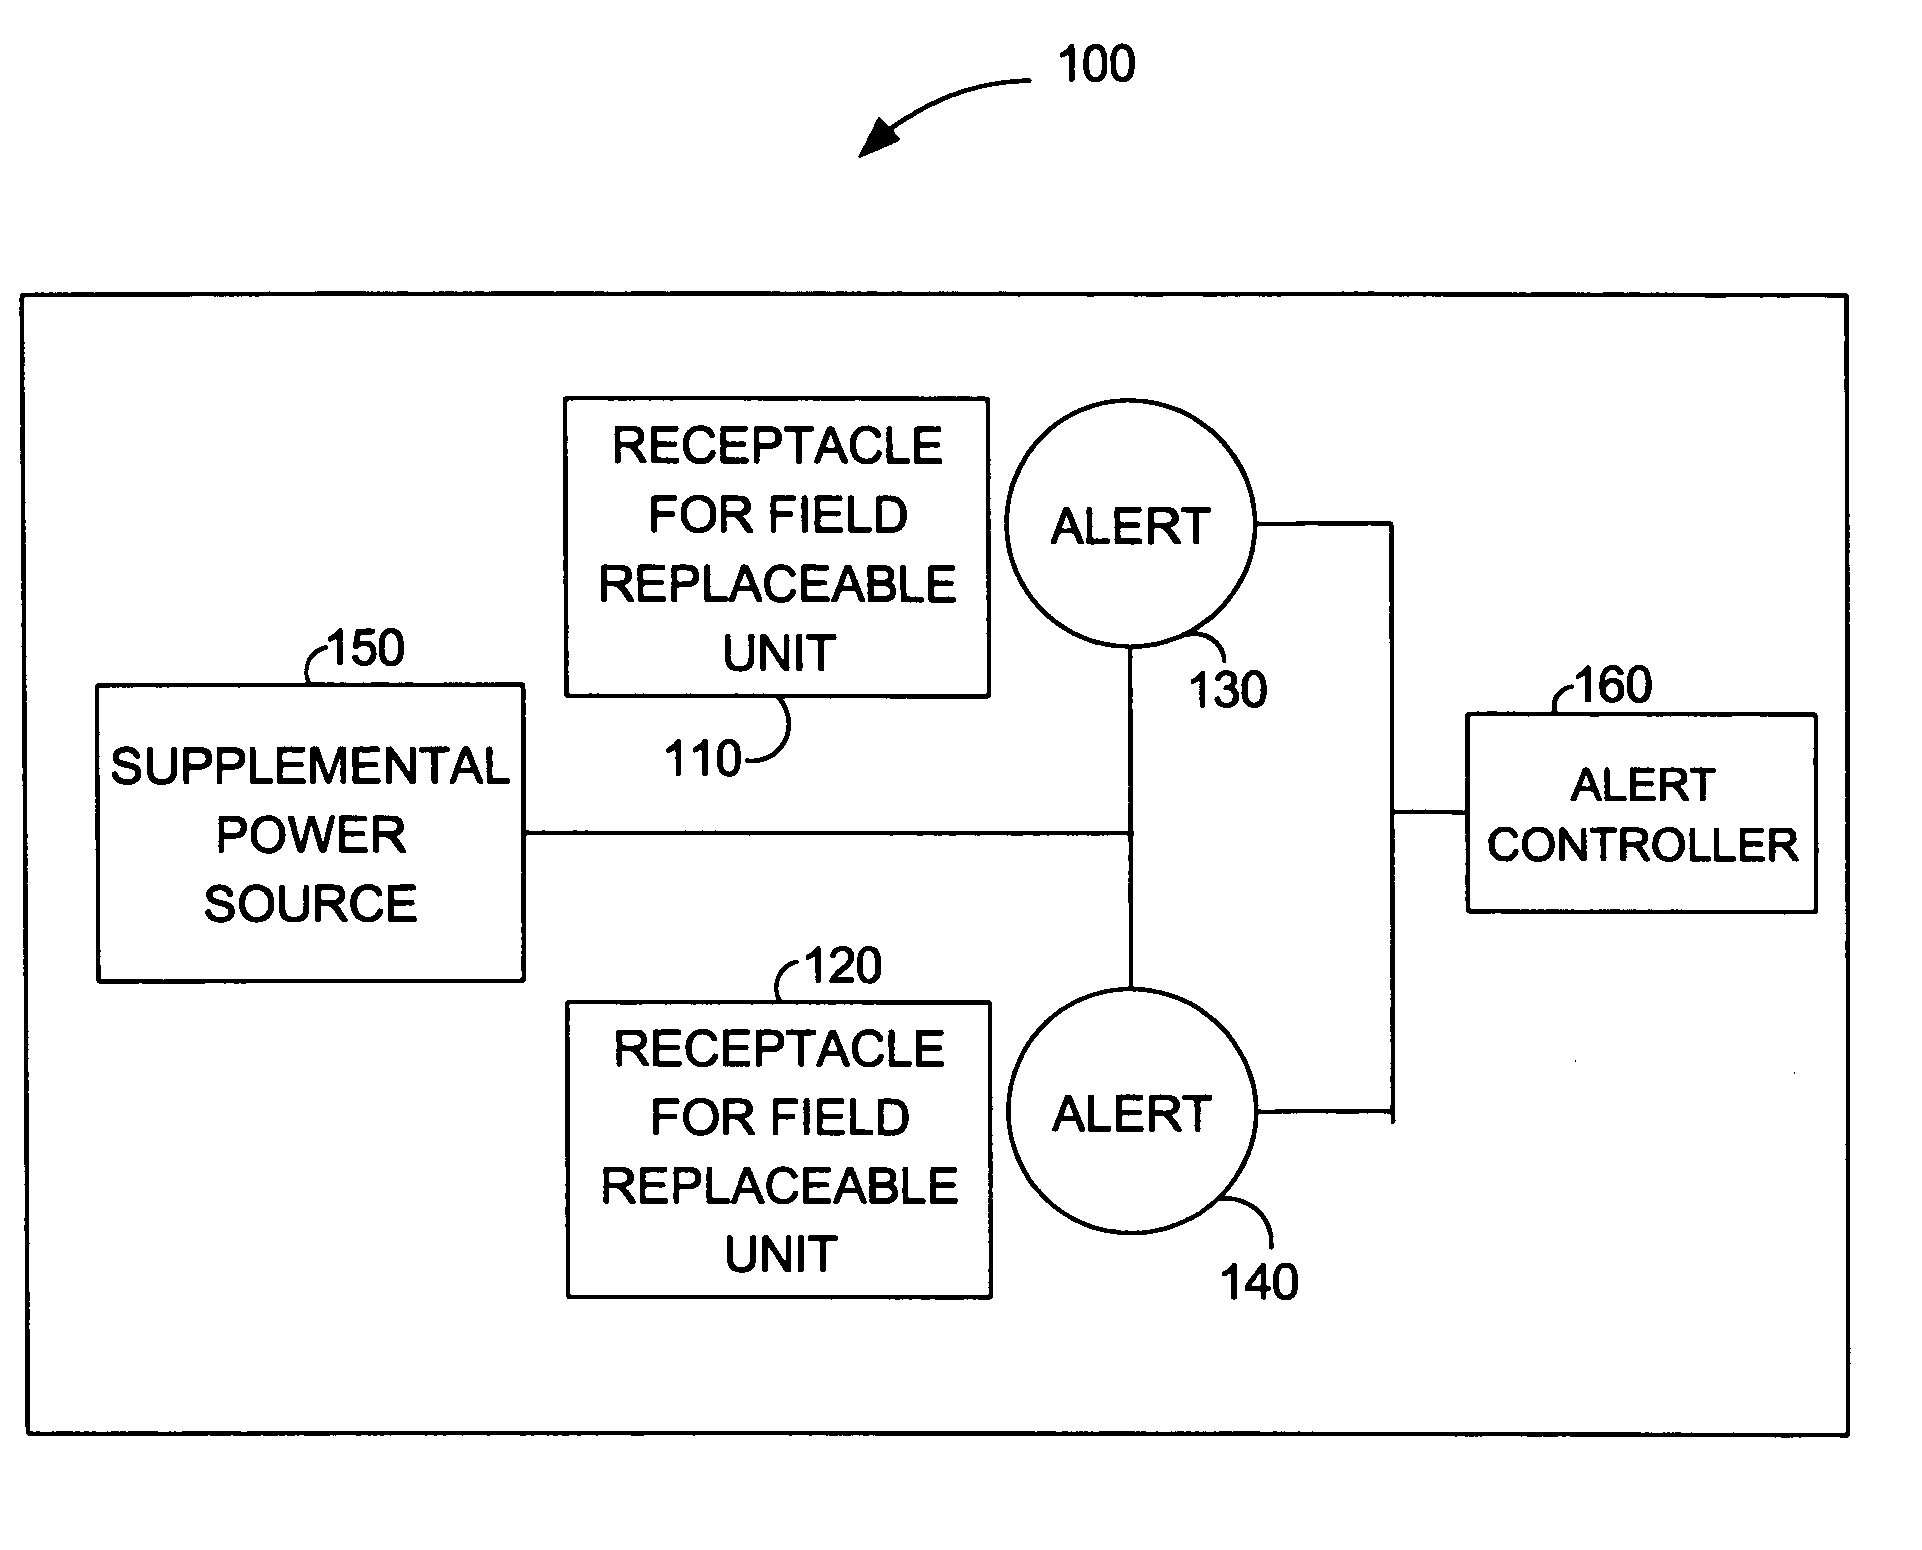 Alert for indicating field replaceable unit status and configuration